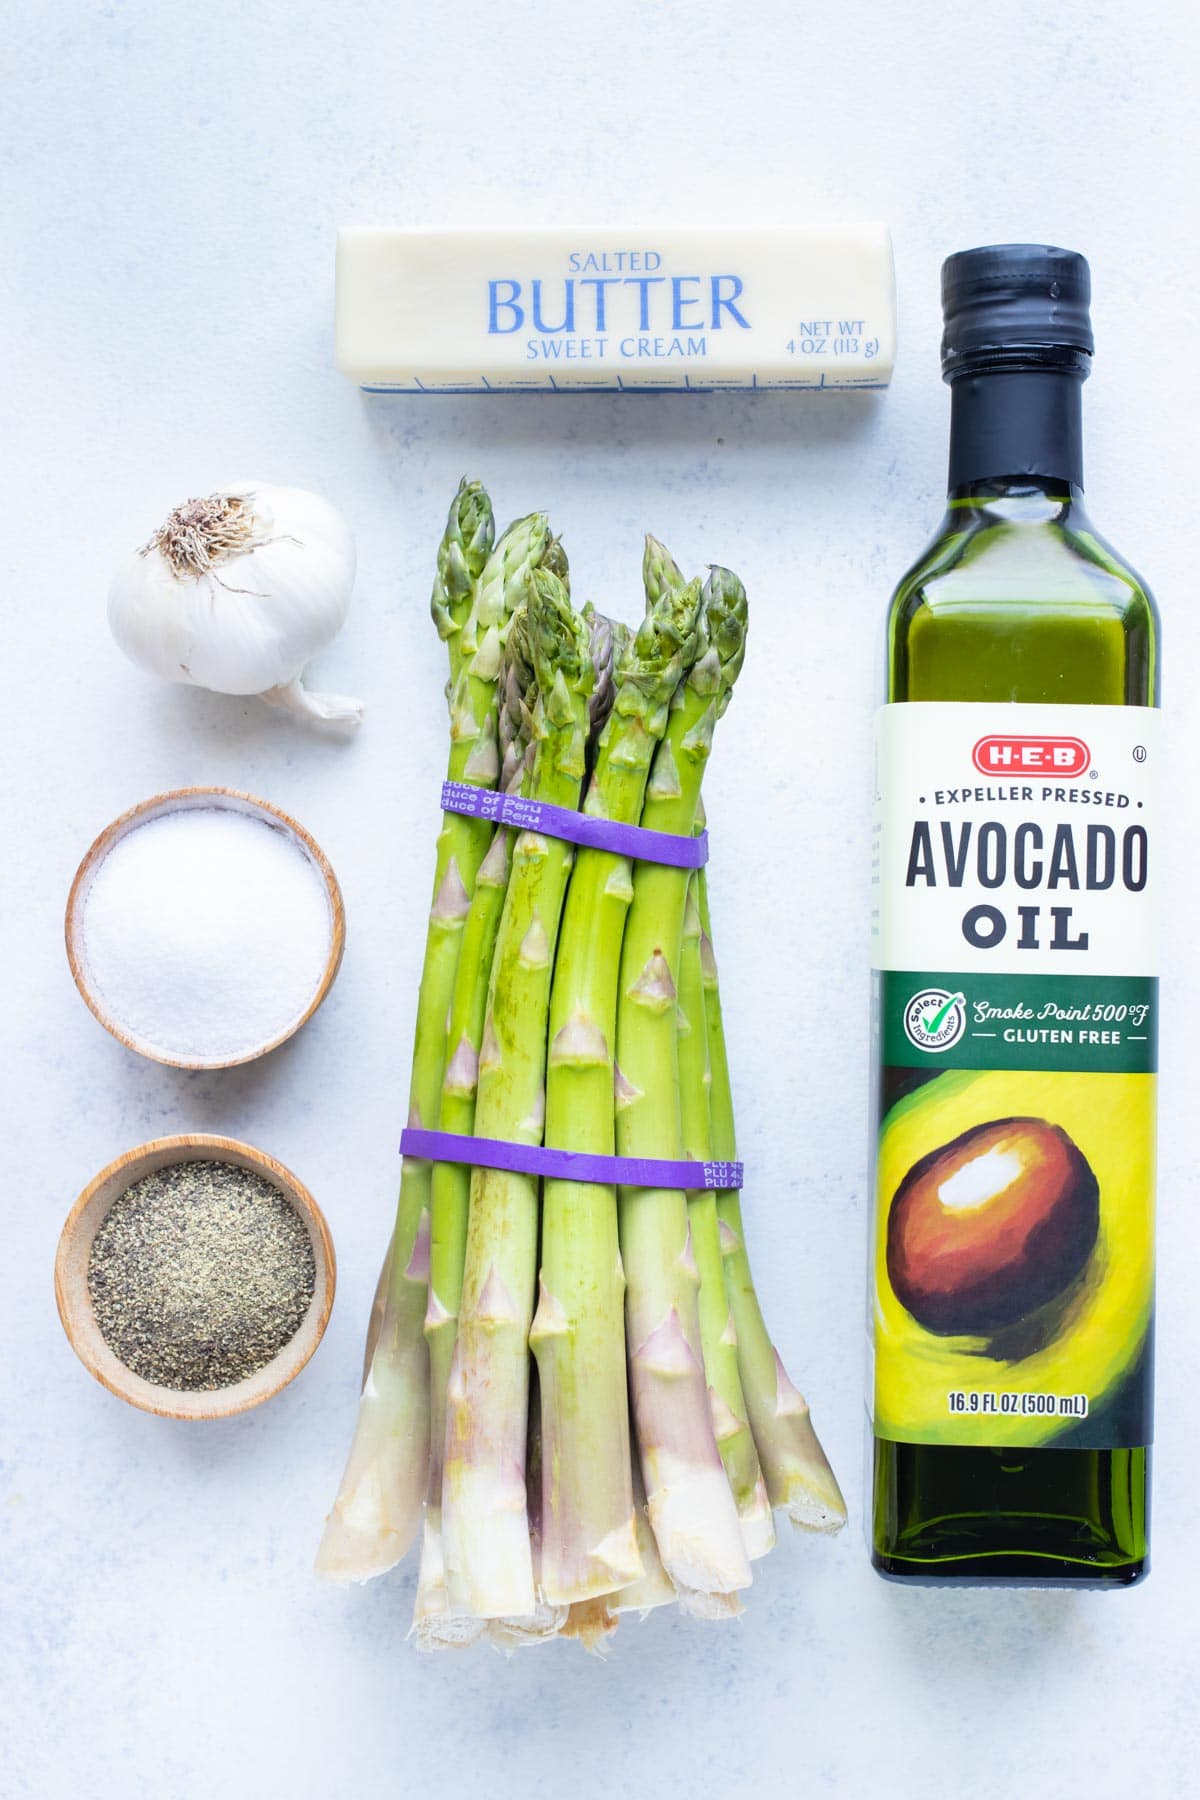 Avocado oil, asparagus, garlic, salt, pepper, and butter are the ingredients in this recipe.